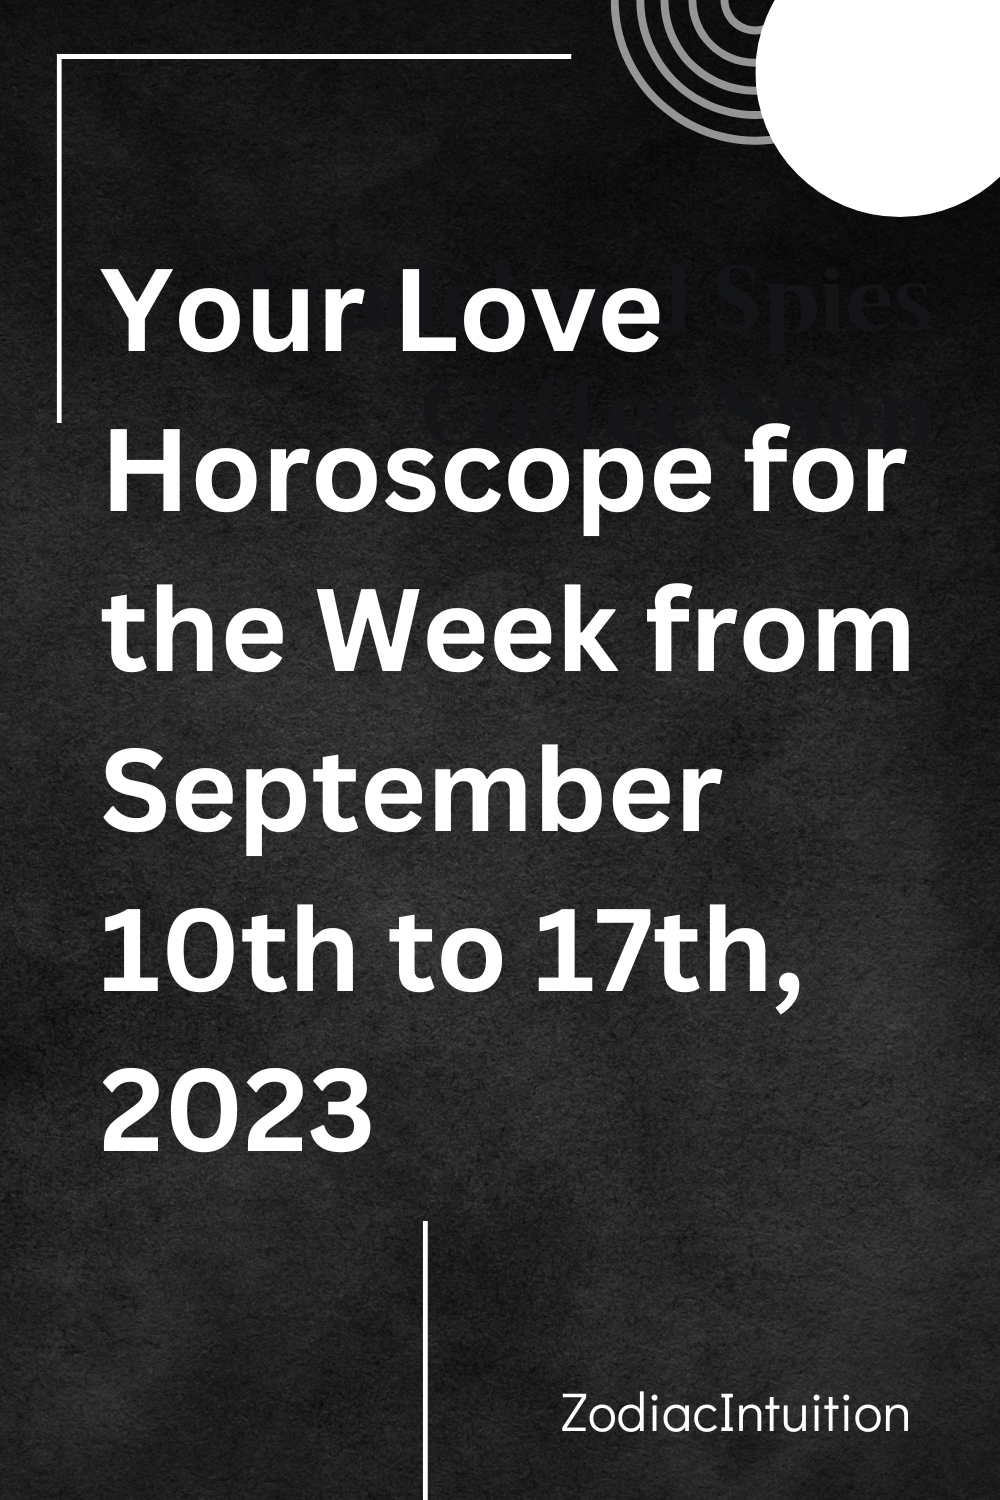 Your Love Horoscope for the Week from September 10th to 17th, 2023